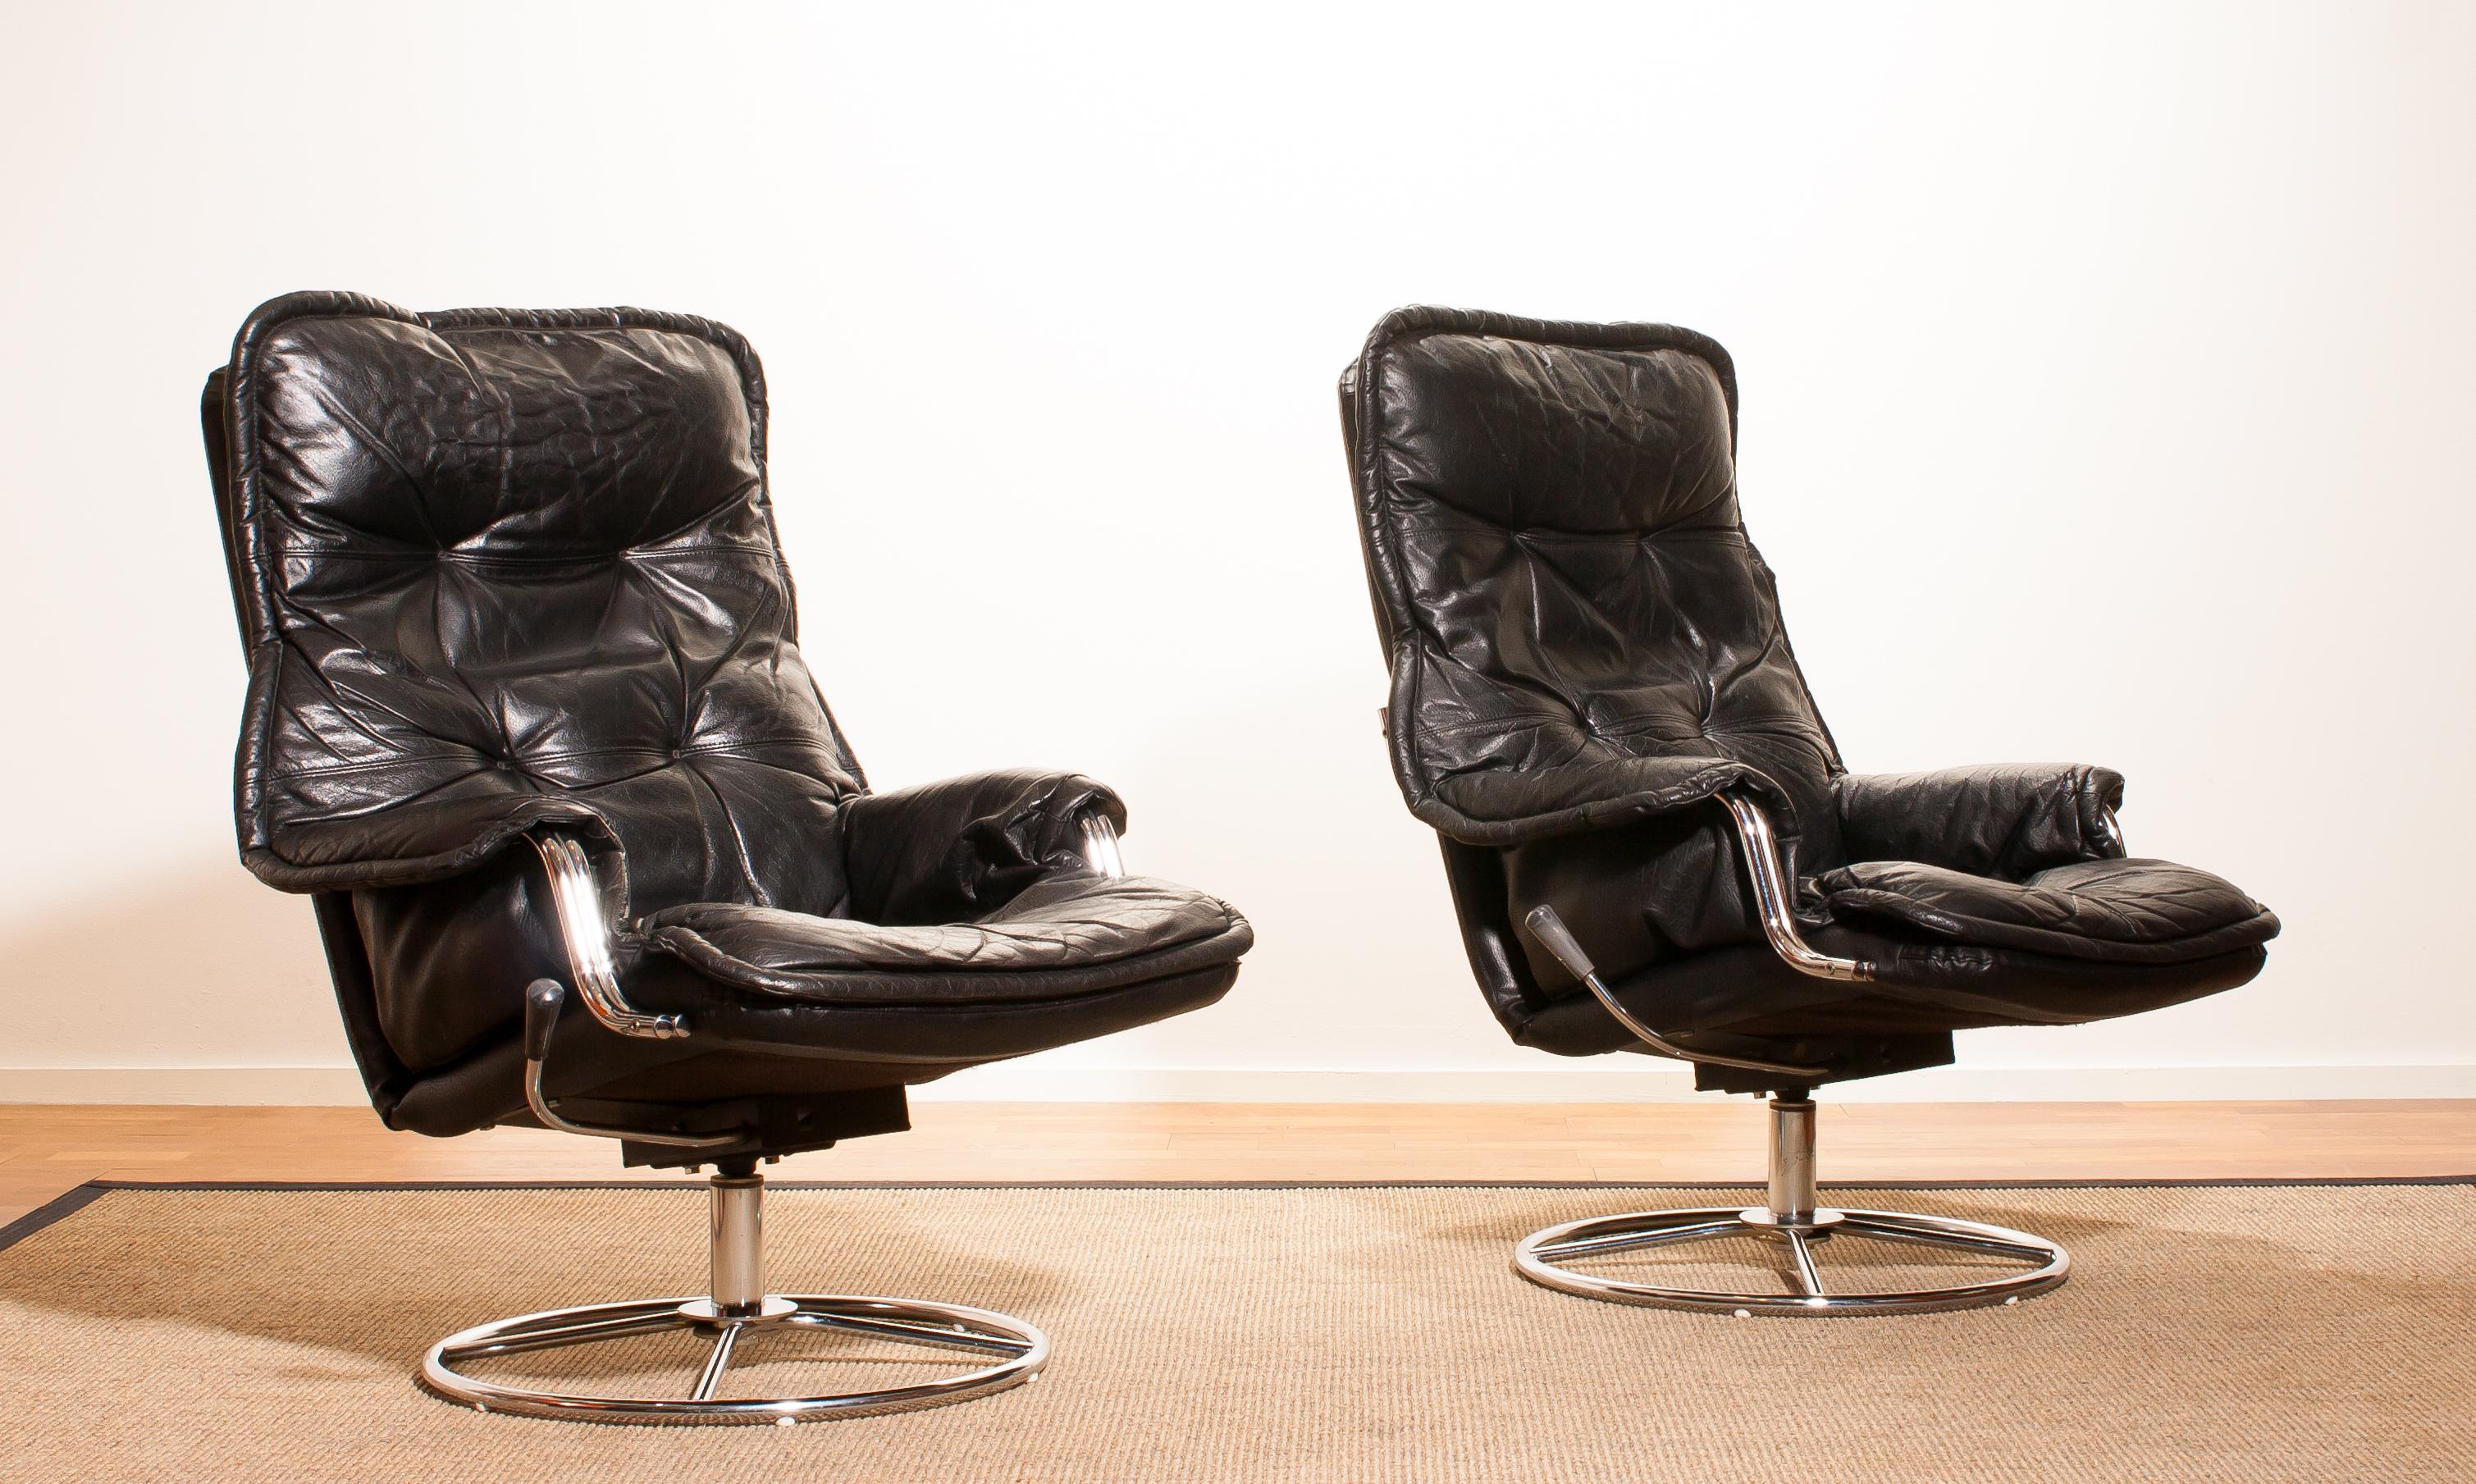 Beautiful lounge chairs made in Sweden.
These very nice design chairs have a black leather seating and armrests on a swivel chrome steel frame.
They are in a wonderful condition.
Period 1970s
Dimensions: H 94 cm, W 68 cm, D 72 cm, SH 40.